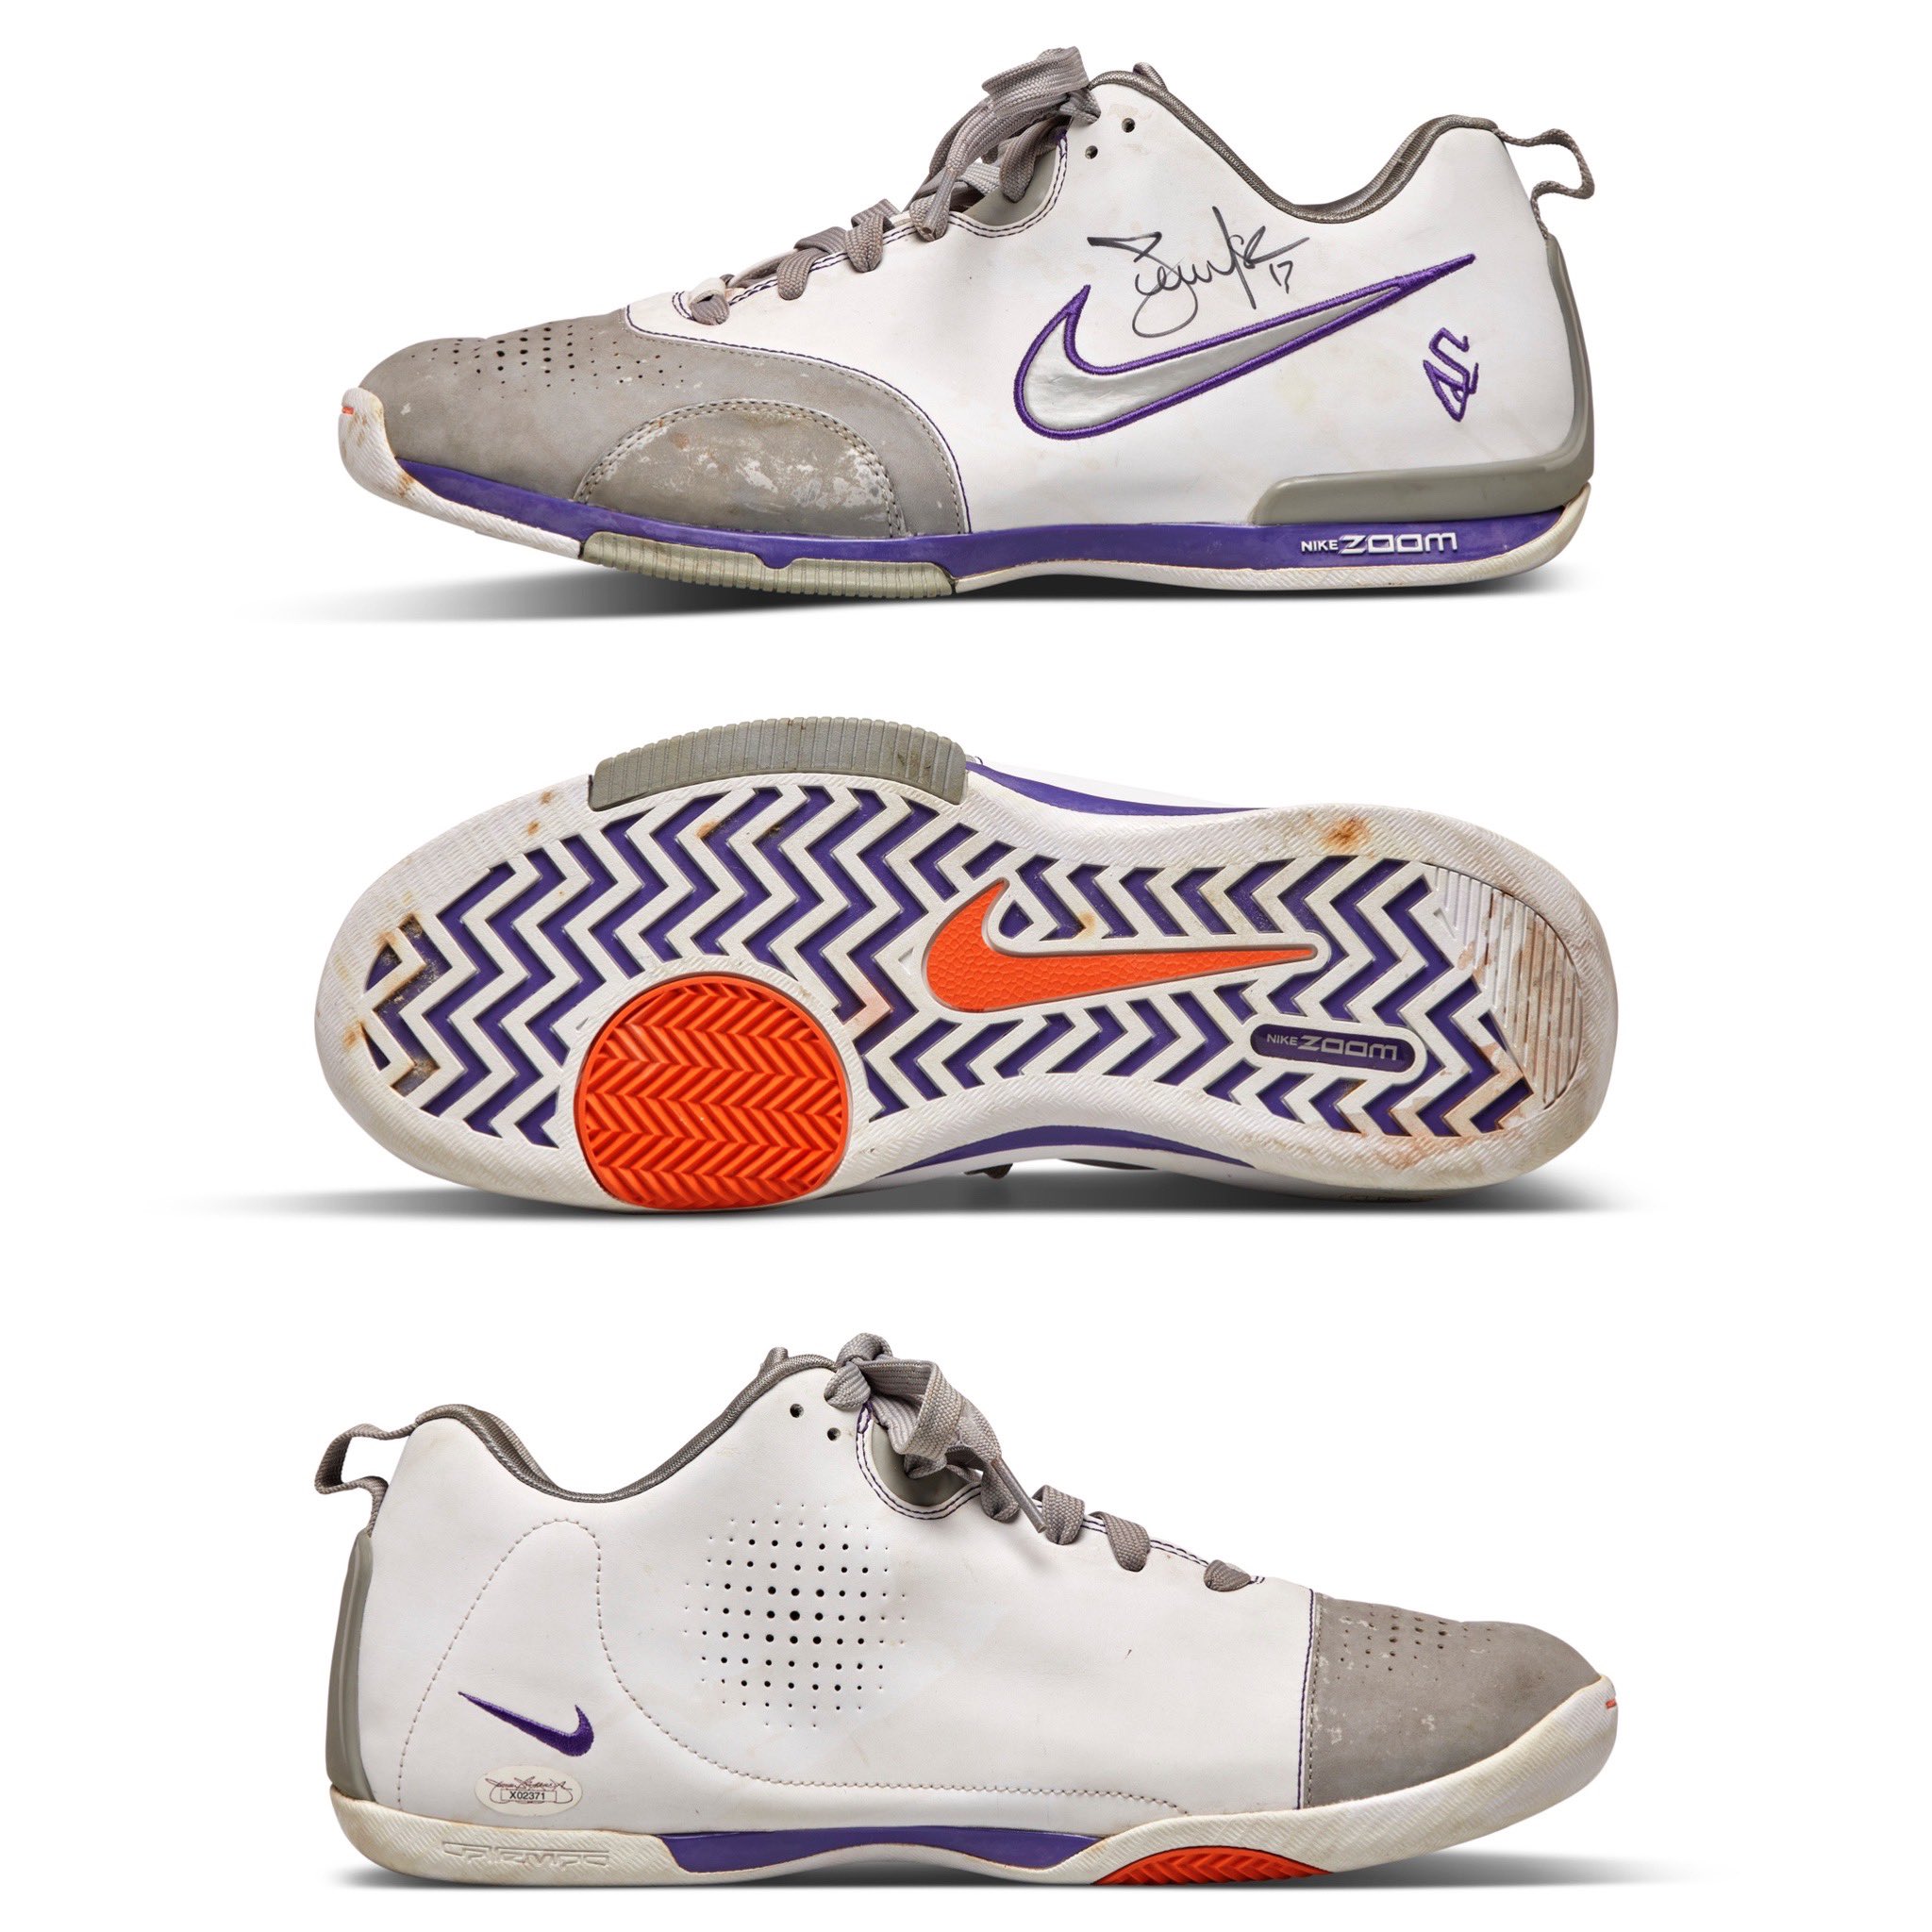 shoezeum Twitter: "Steve Nash was the of the in 2005 and 2006. In 2007 he wore these Nike Zoom BB Low PEs. people credit Kobe Bryant as being